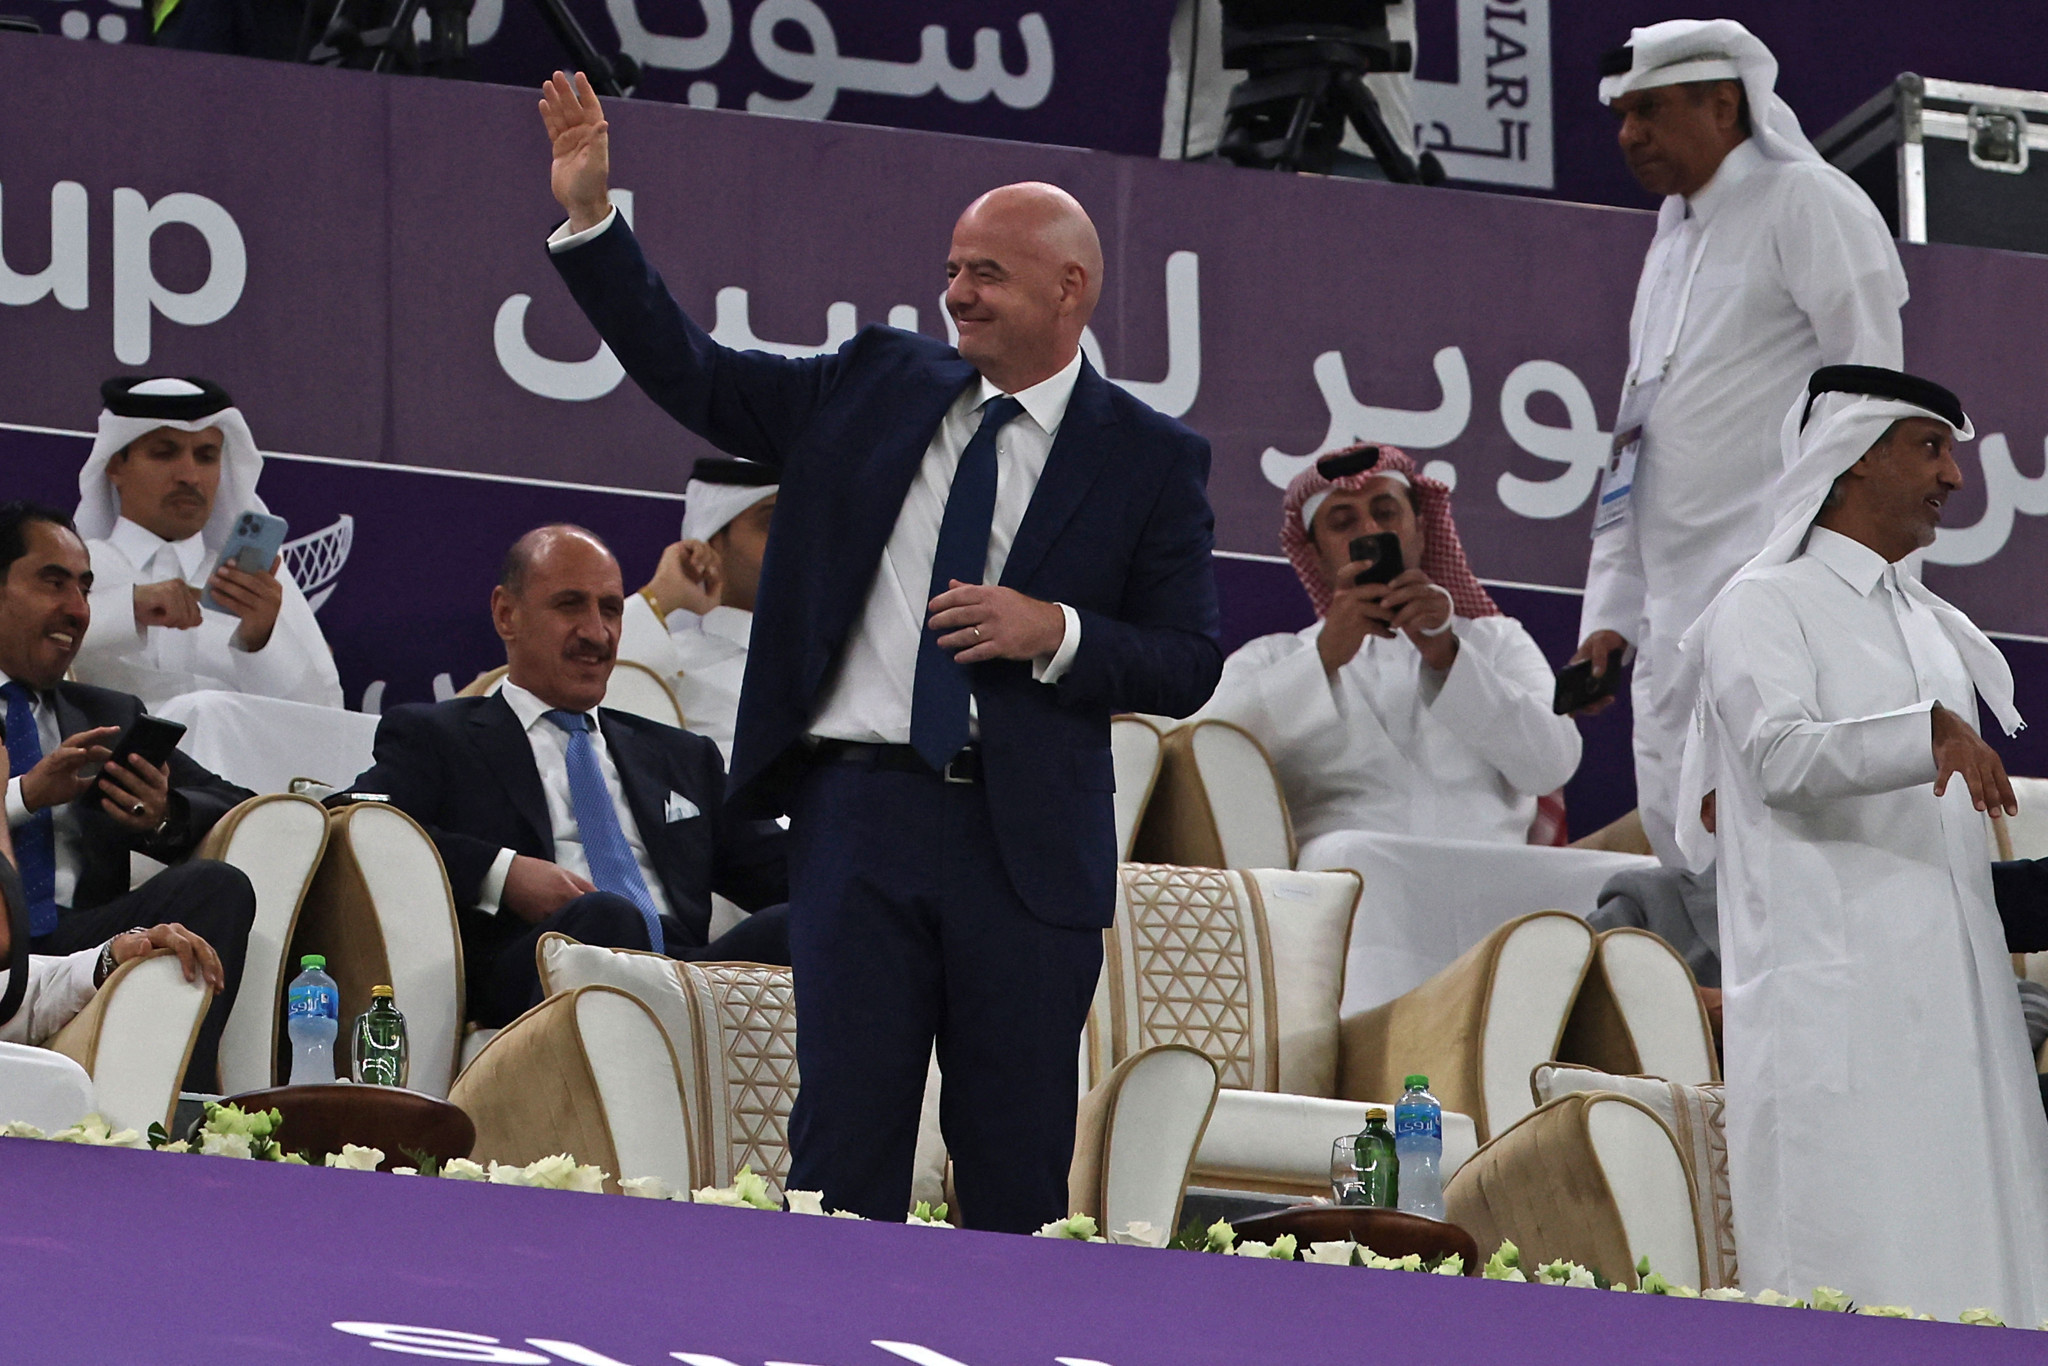 FIFA President Infantino attends test event at Qatar 2022 World Cup final venue